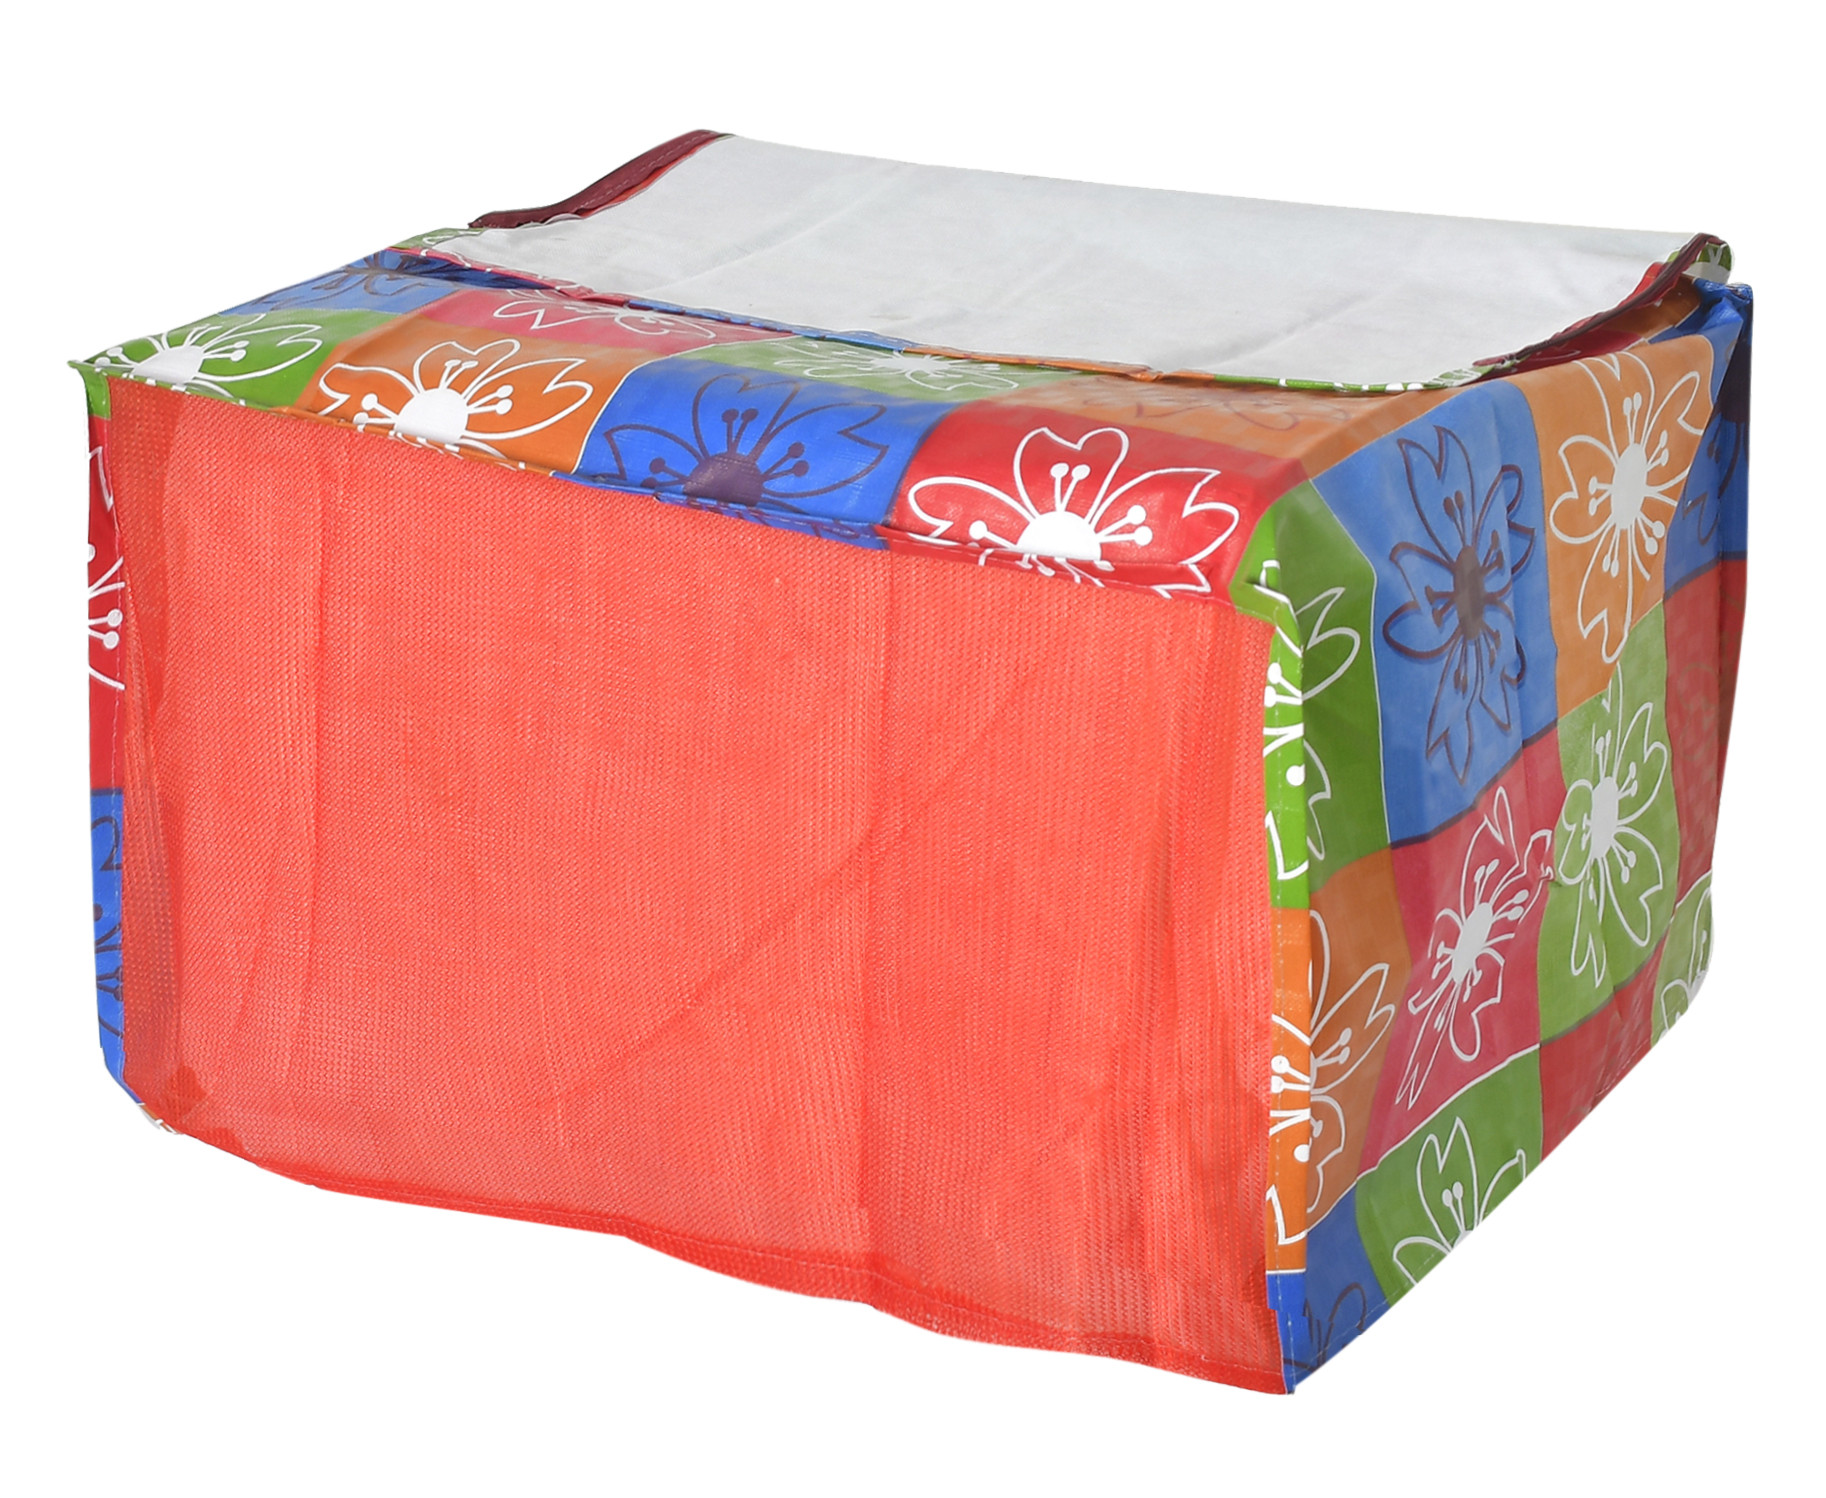 Kuber Industries PVC Flower Printed Microwave Oven Cover,20 Ltr. (Multicolor)-HS43KUBMART25945